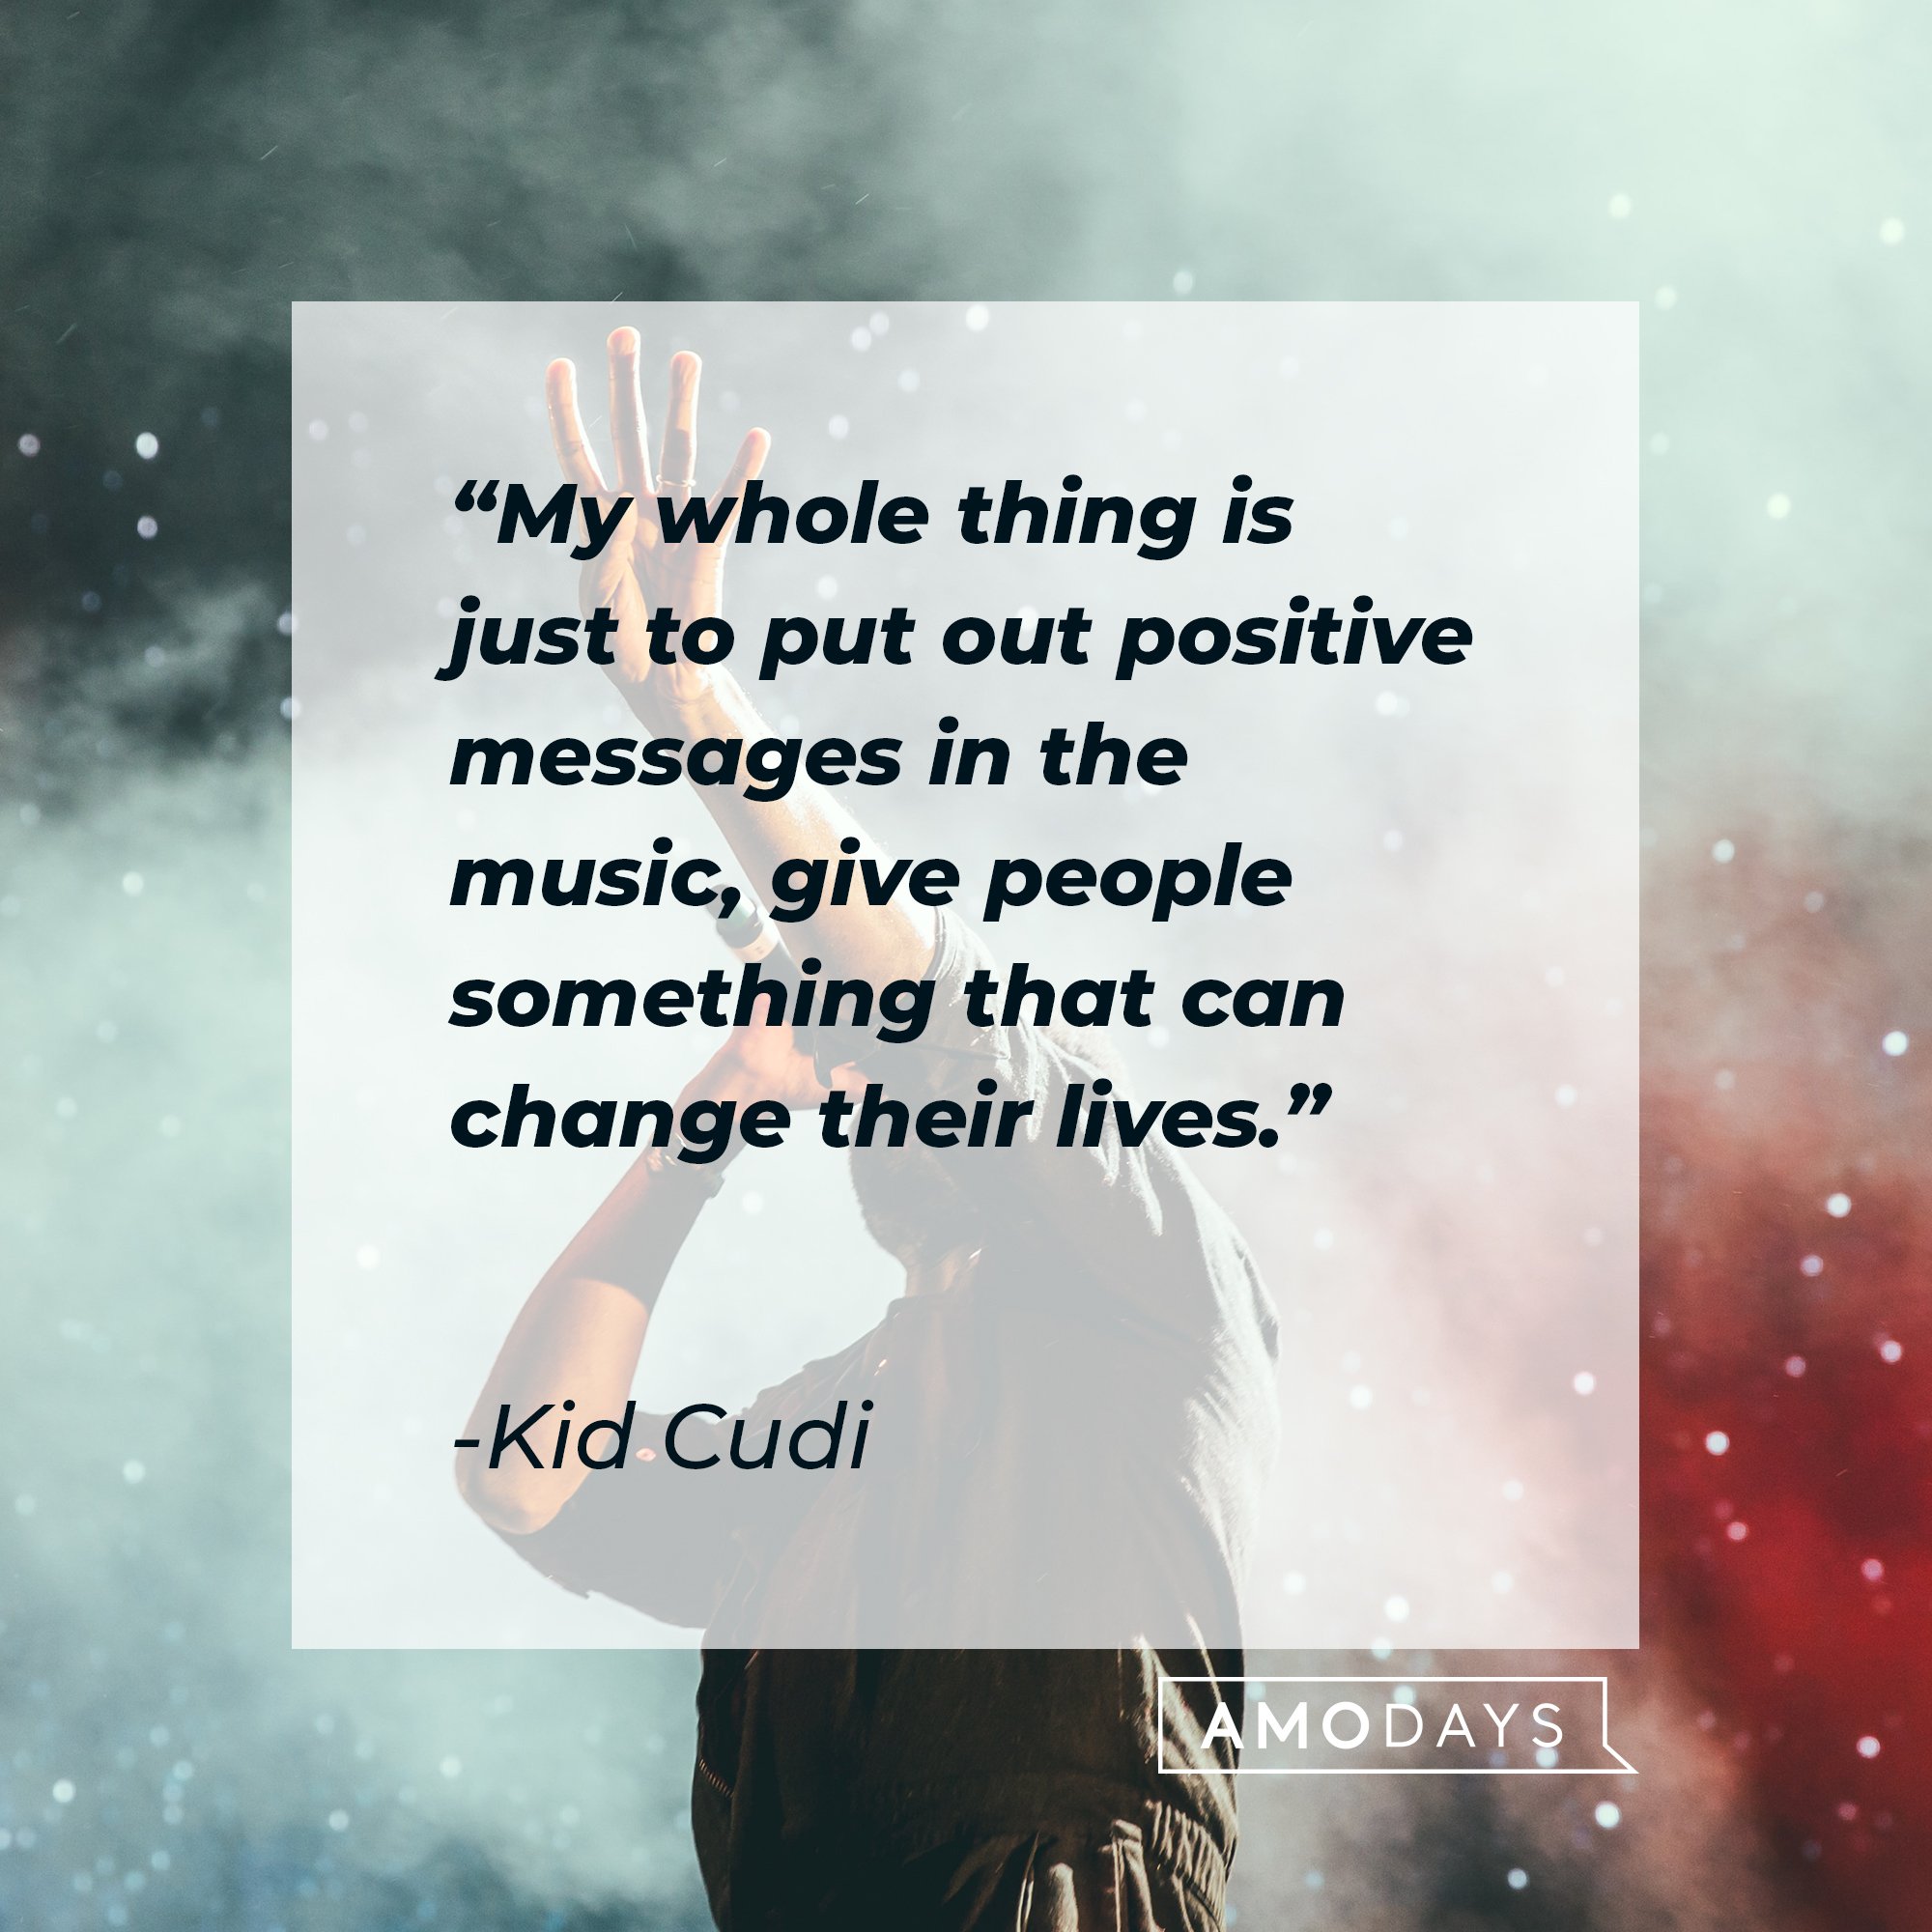 Kid Cudi’s quote: "My whole thing is just to put out positive messages in the music, give people something that can change their lives.” | Image: AmoDays